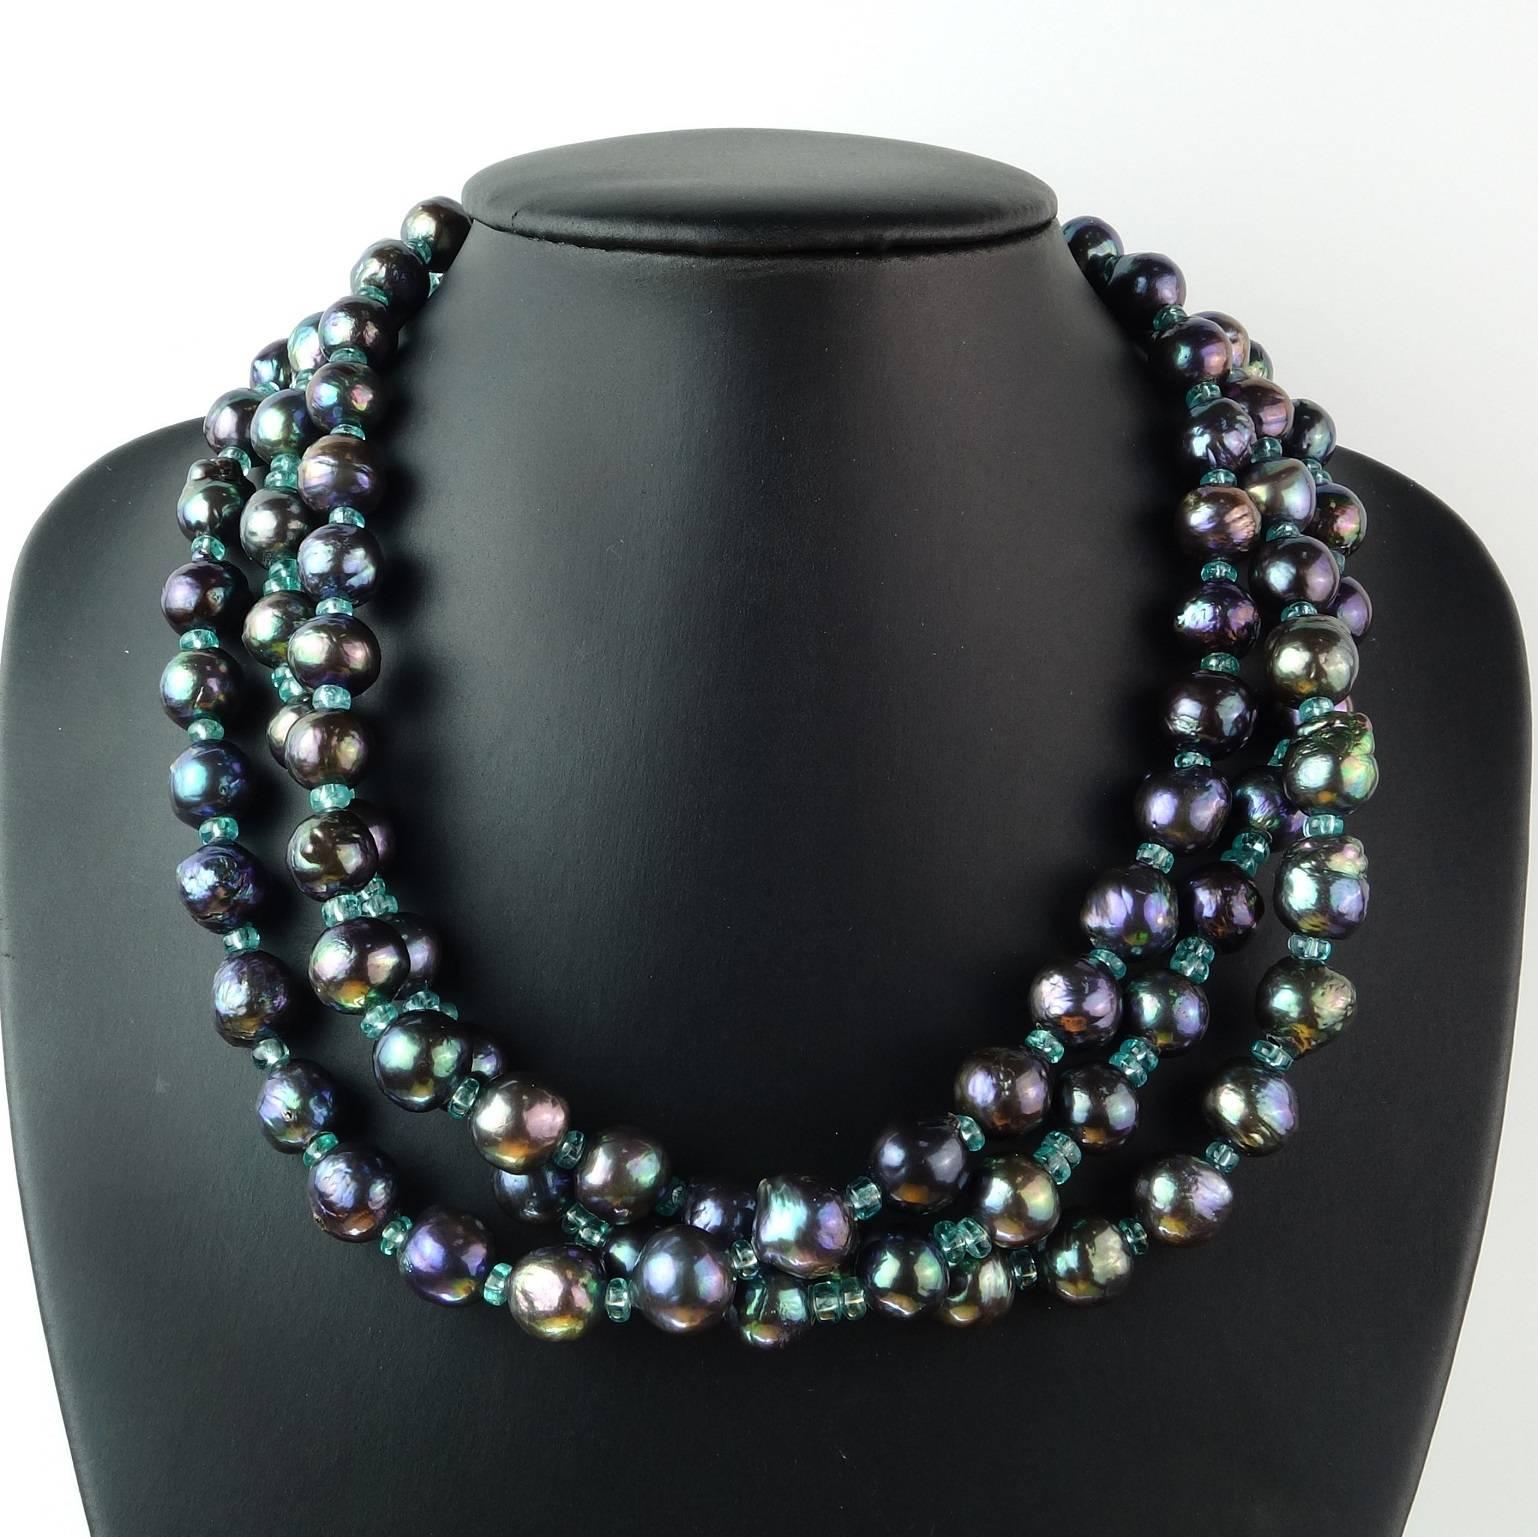 Stunning three strand necklace of blue/green iridescent 10MM pearls accented with faceted 4MM Apatite. The necklace is 18.5 inches in length and can be twisted to make it choker length.  It is secured with a floral motif Turkish Sterling Silver